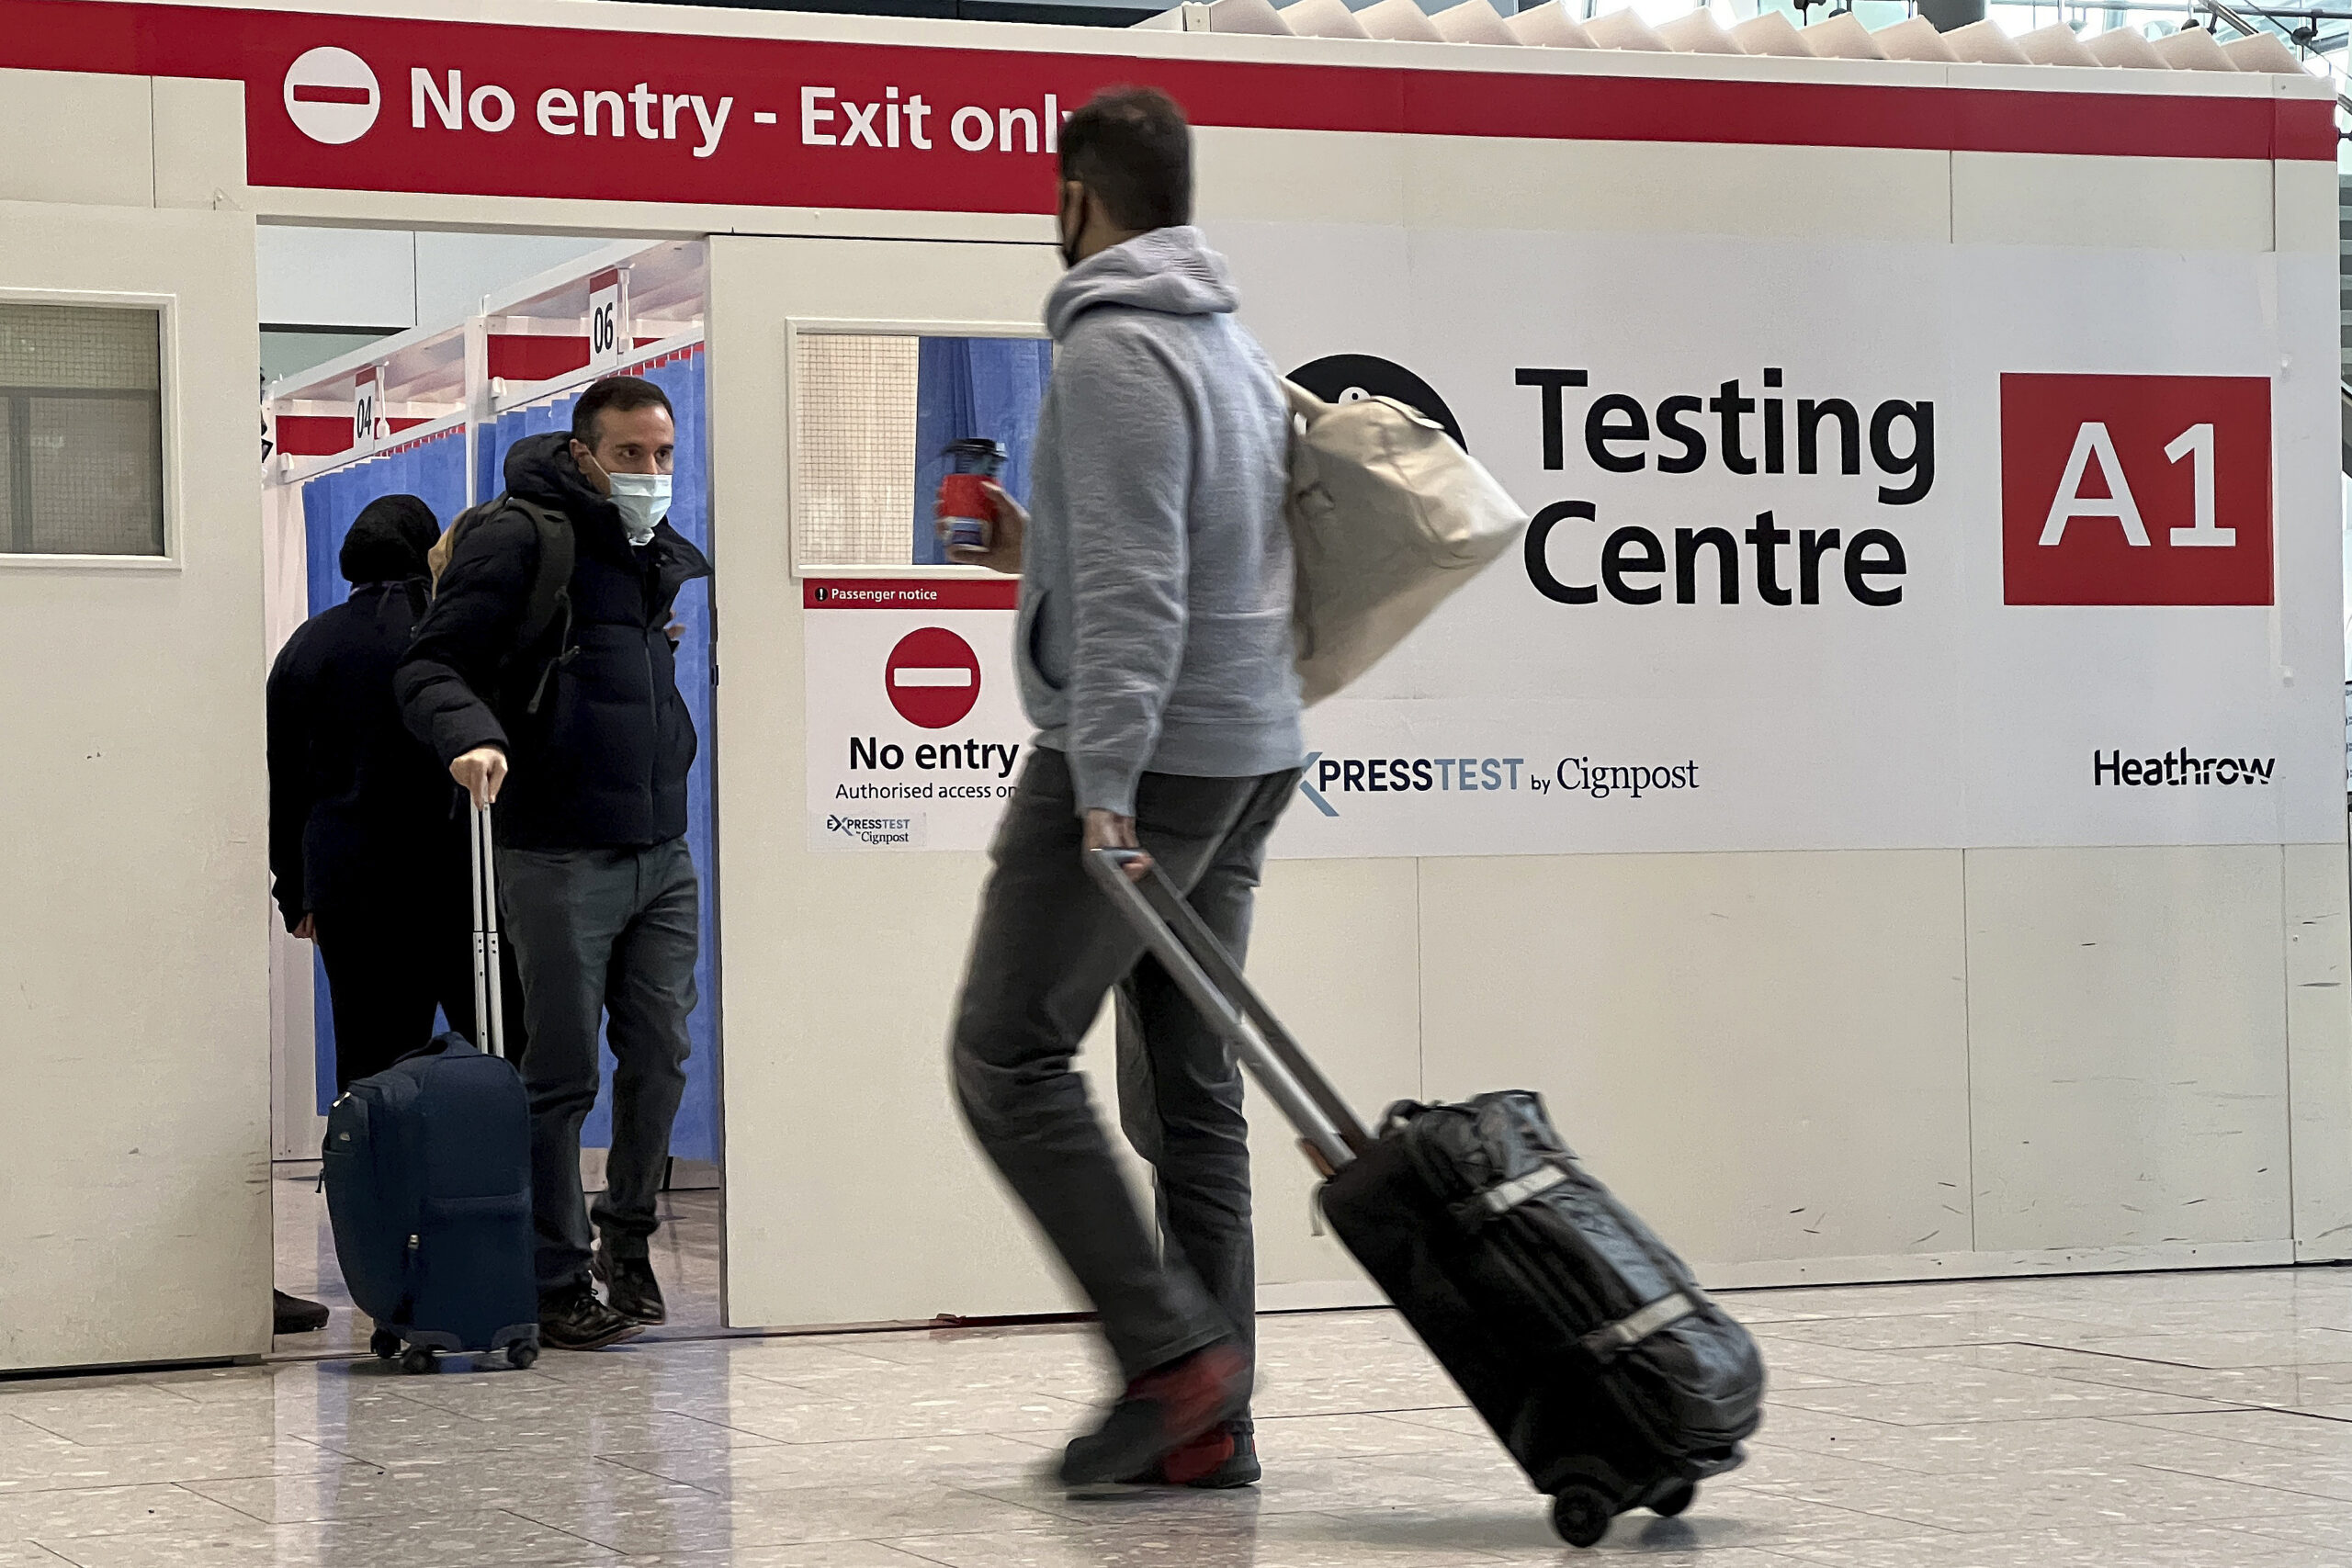 FILE - Passengers get a COVID-19 test at Heathrow Airport in London, Nov. 29, 2021. The Biden administration is lifting its requirement that international air travelers to the U.S. take a COVID-19 test within a day before boarding their flights, easing one of the last remaining government mandates meant to contain the spread of the coronavirus. A senior administration official says the mandate expires Sunday at 12:01 a.m. Eastern time. The official says the Centers for Disease Control and Prevention has determined that it’s no longer necessary. (AP Photo/Frank Augstein, File)